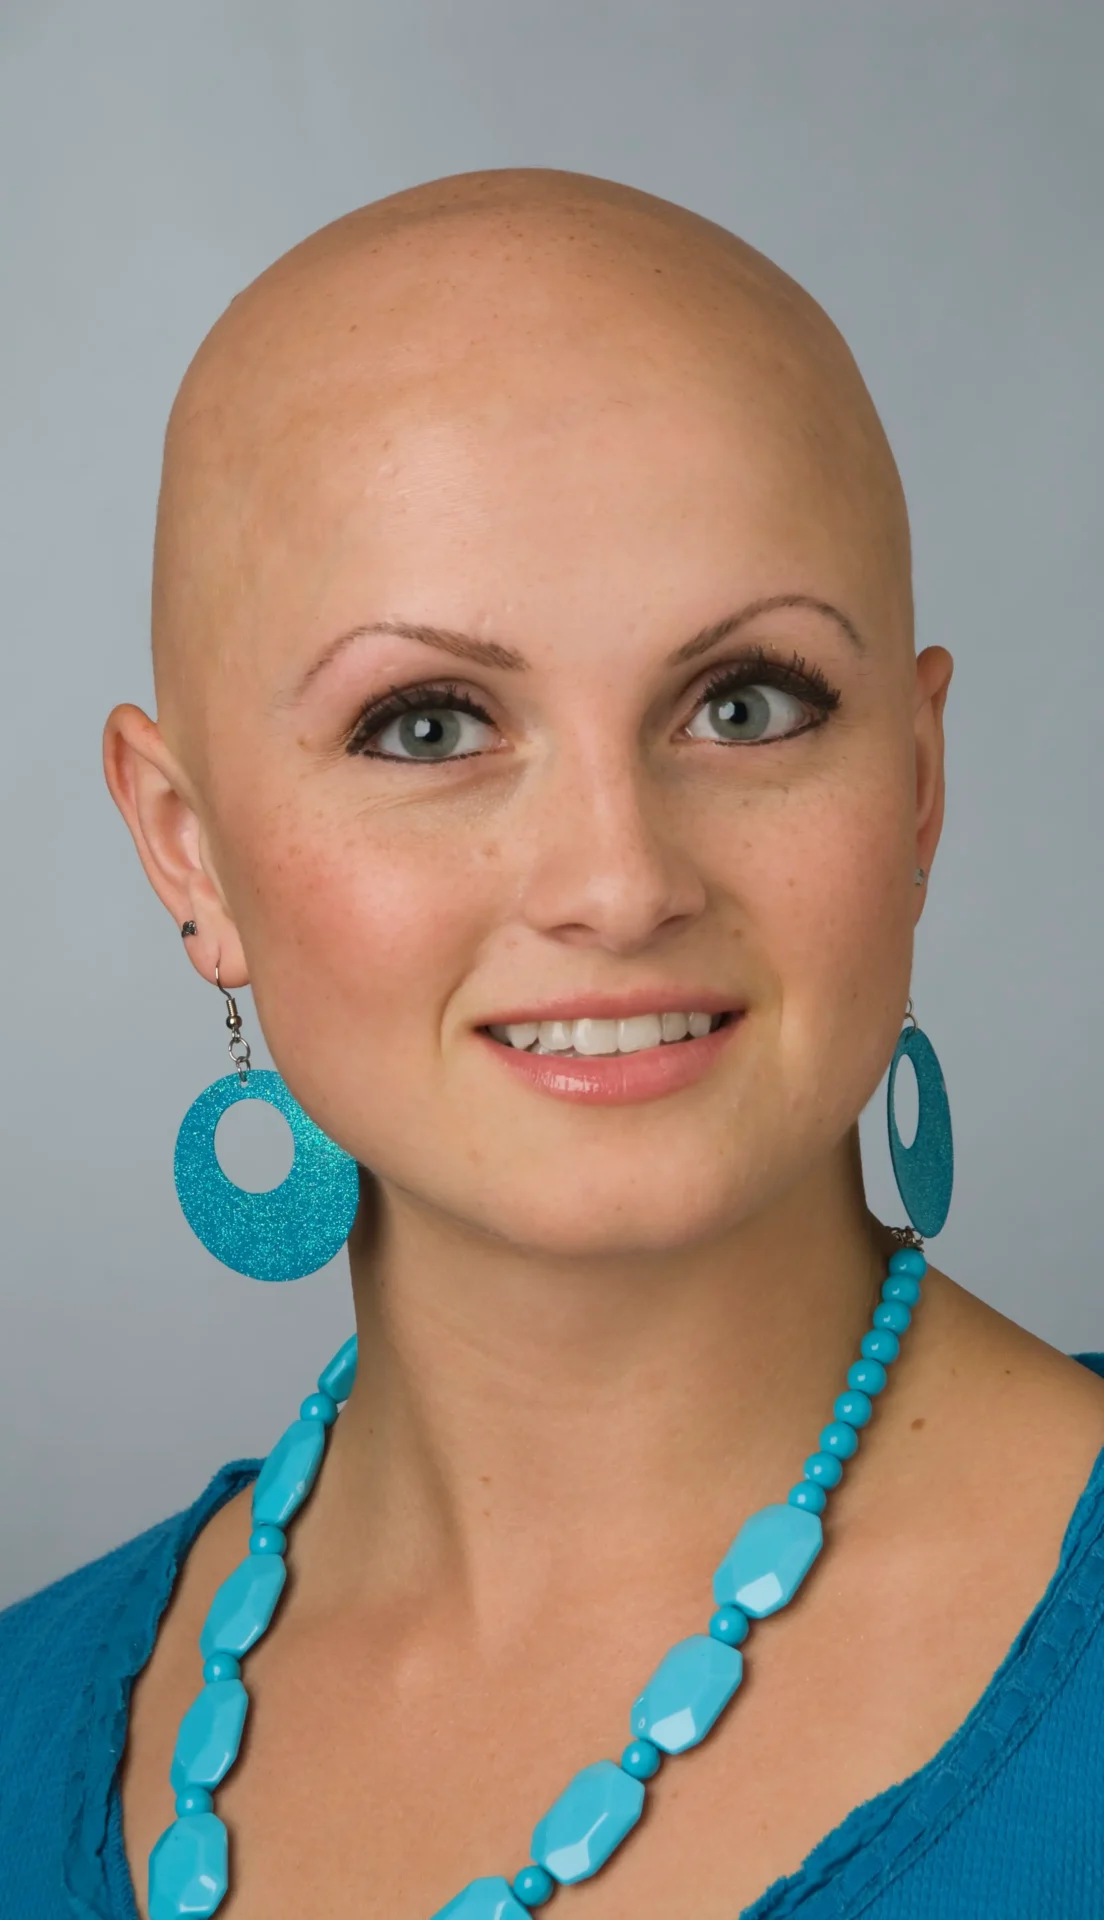 A Woman With a Bald Head in Blue